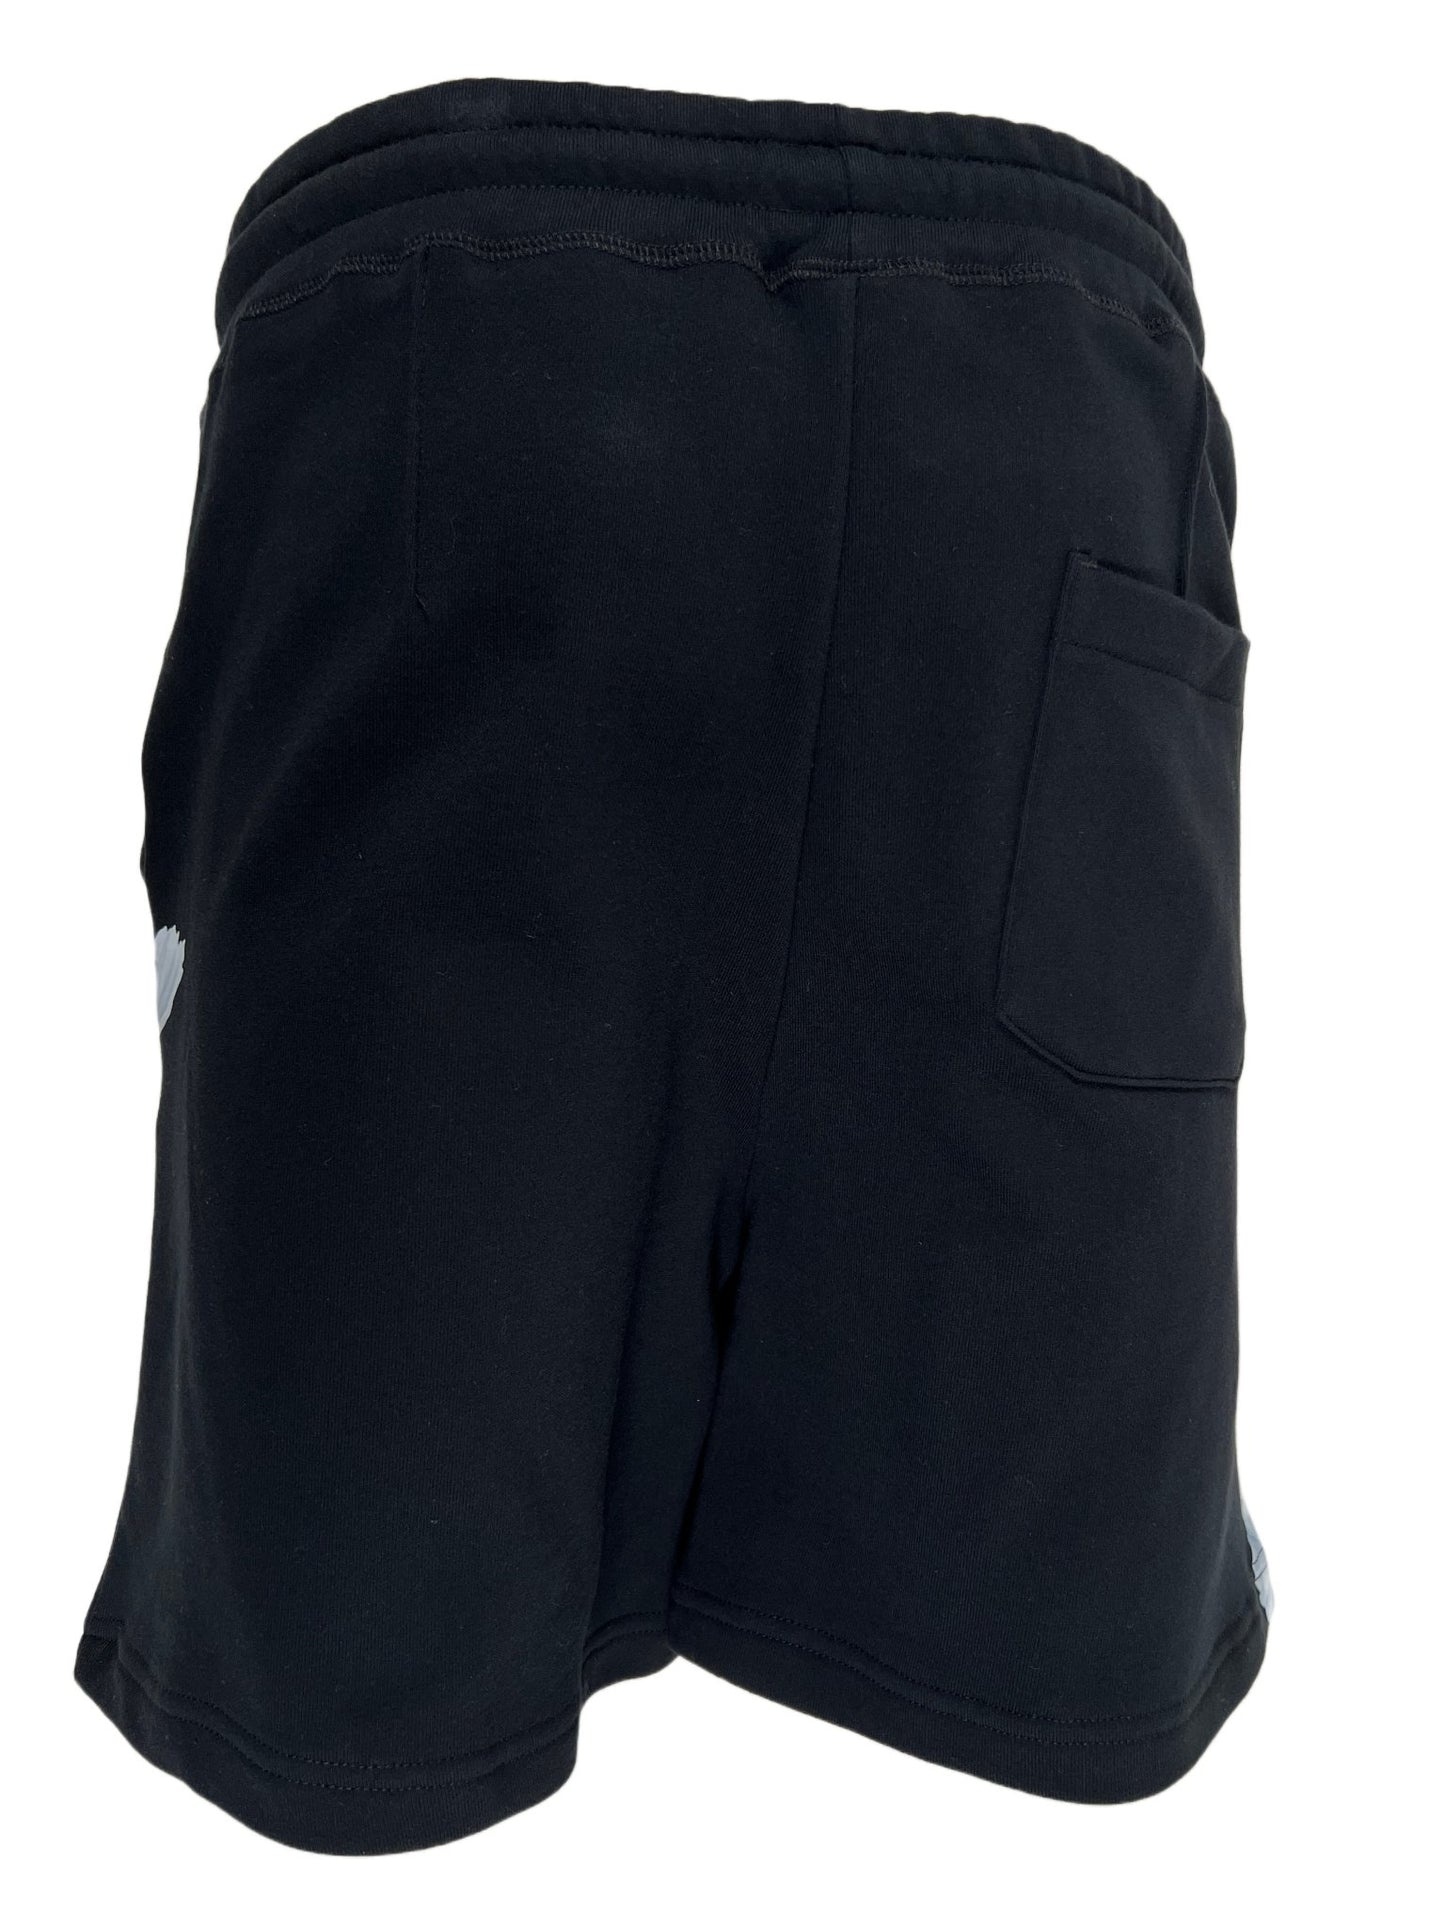 The men's 3.PARADIS SINGING DOVES shorts with a pocket on the side.